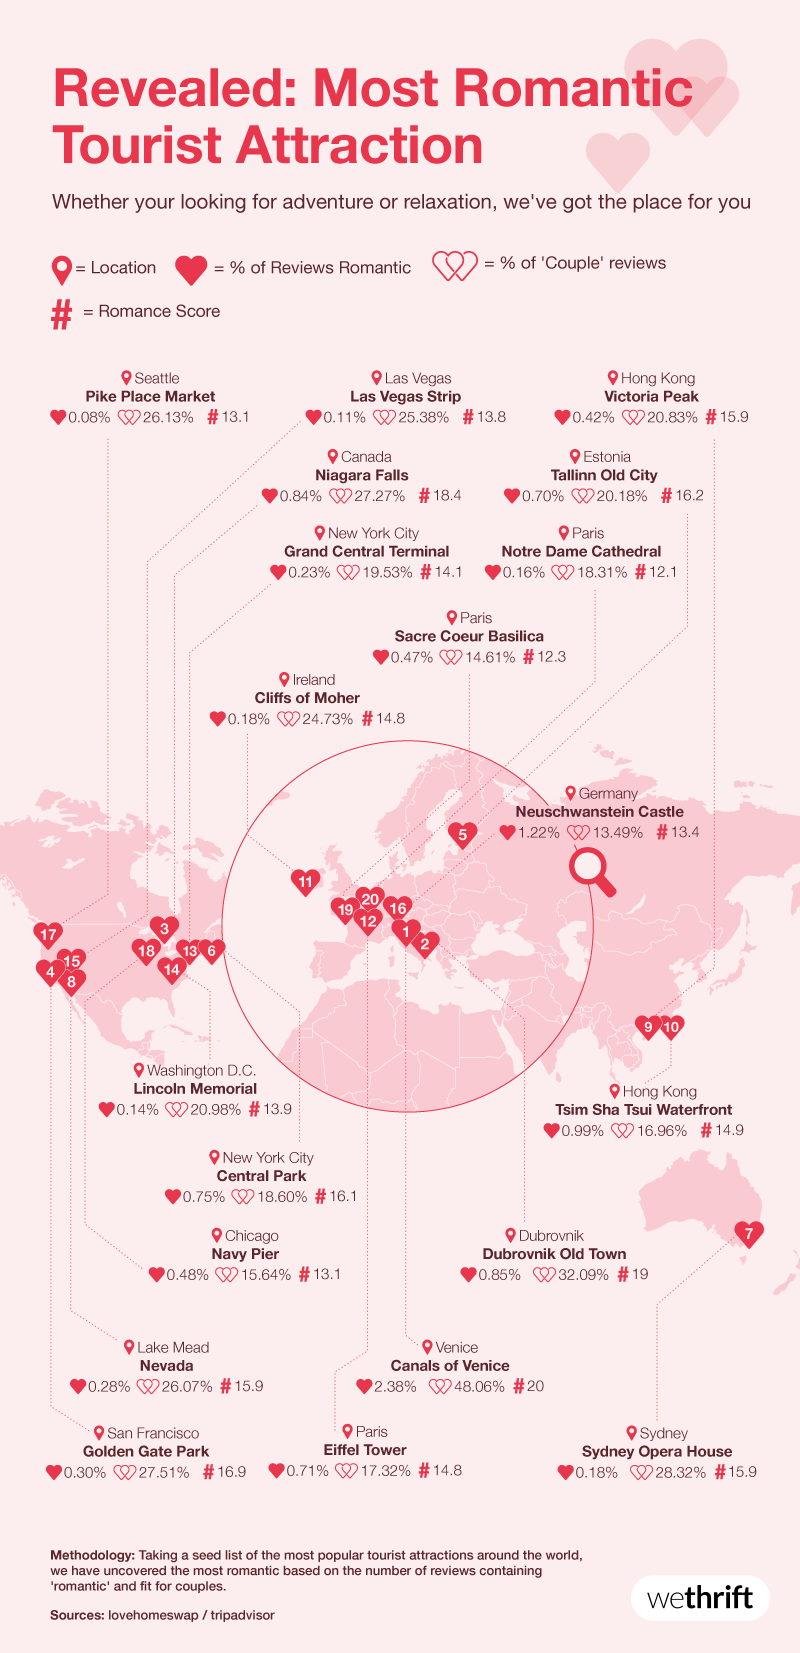 The most romantic tourist attractions